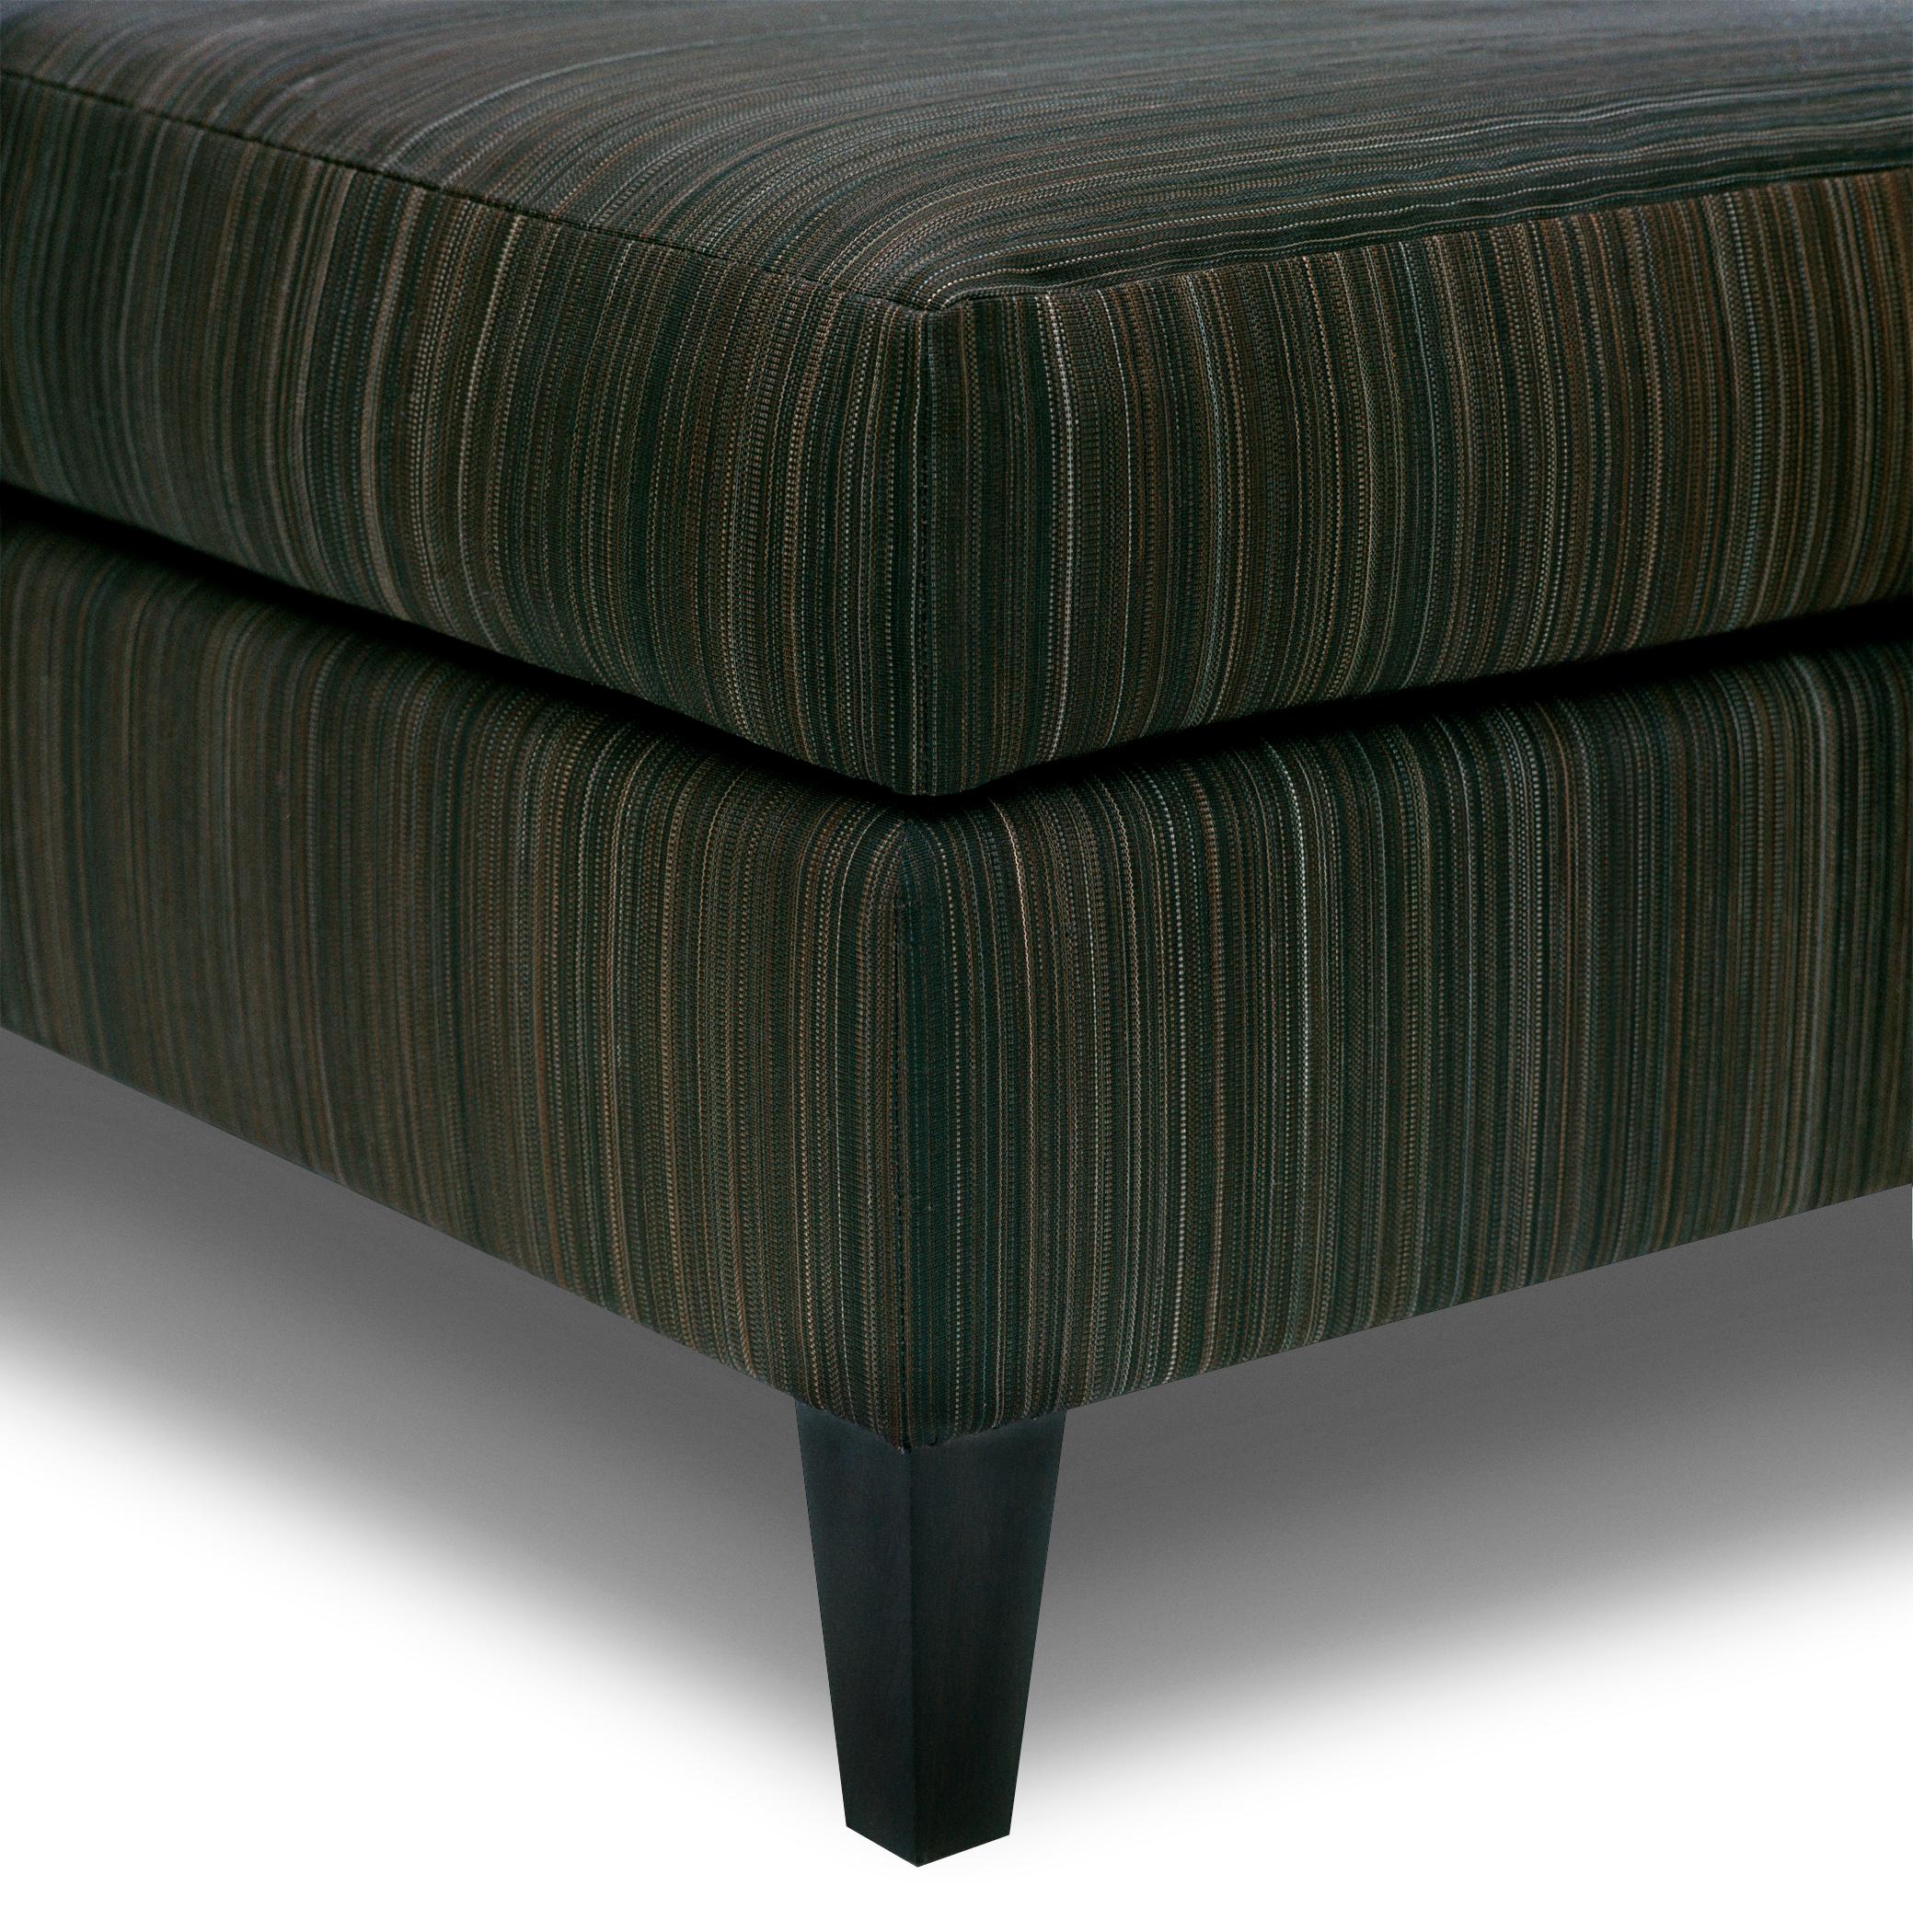 The union ottoman is tightly upholstered with an attached top cushion. Tapered front legs and squared back legs are made of blackened hardwood.

This union ottoman is a made to order item and hand crafted in the US. 
Customer's own material is